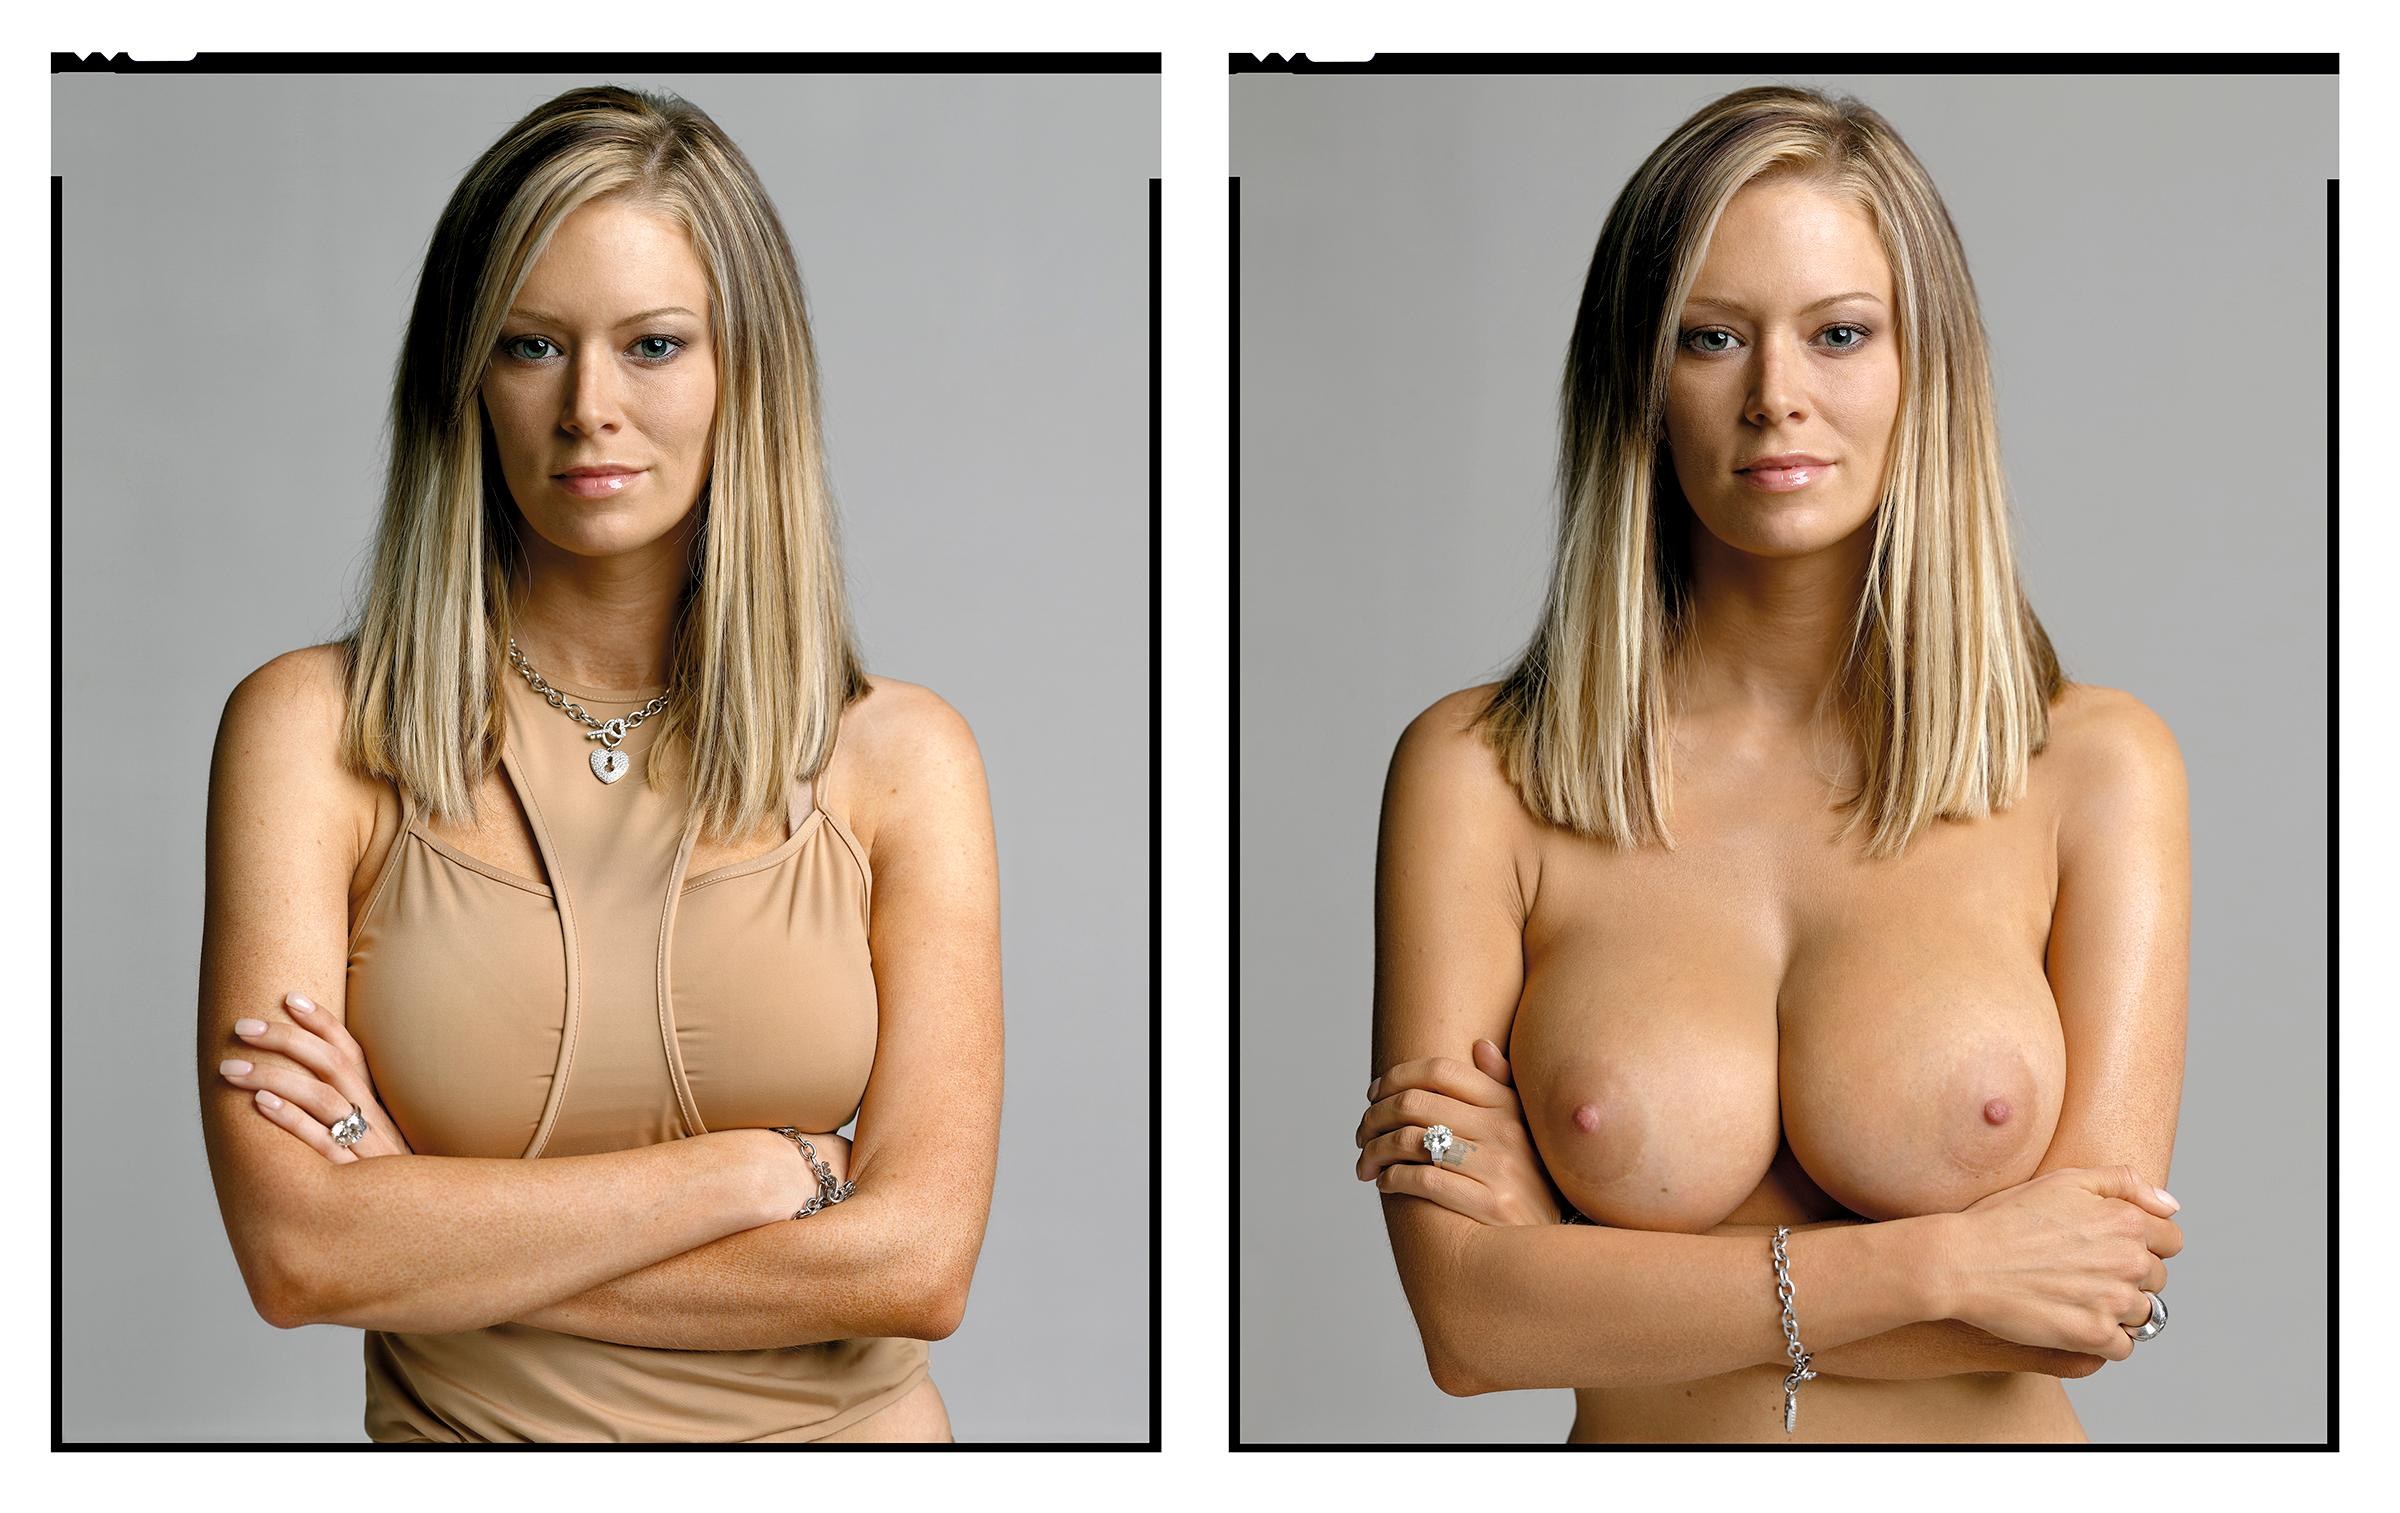 Pictures Of Women With Large Breasts